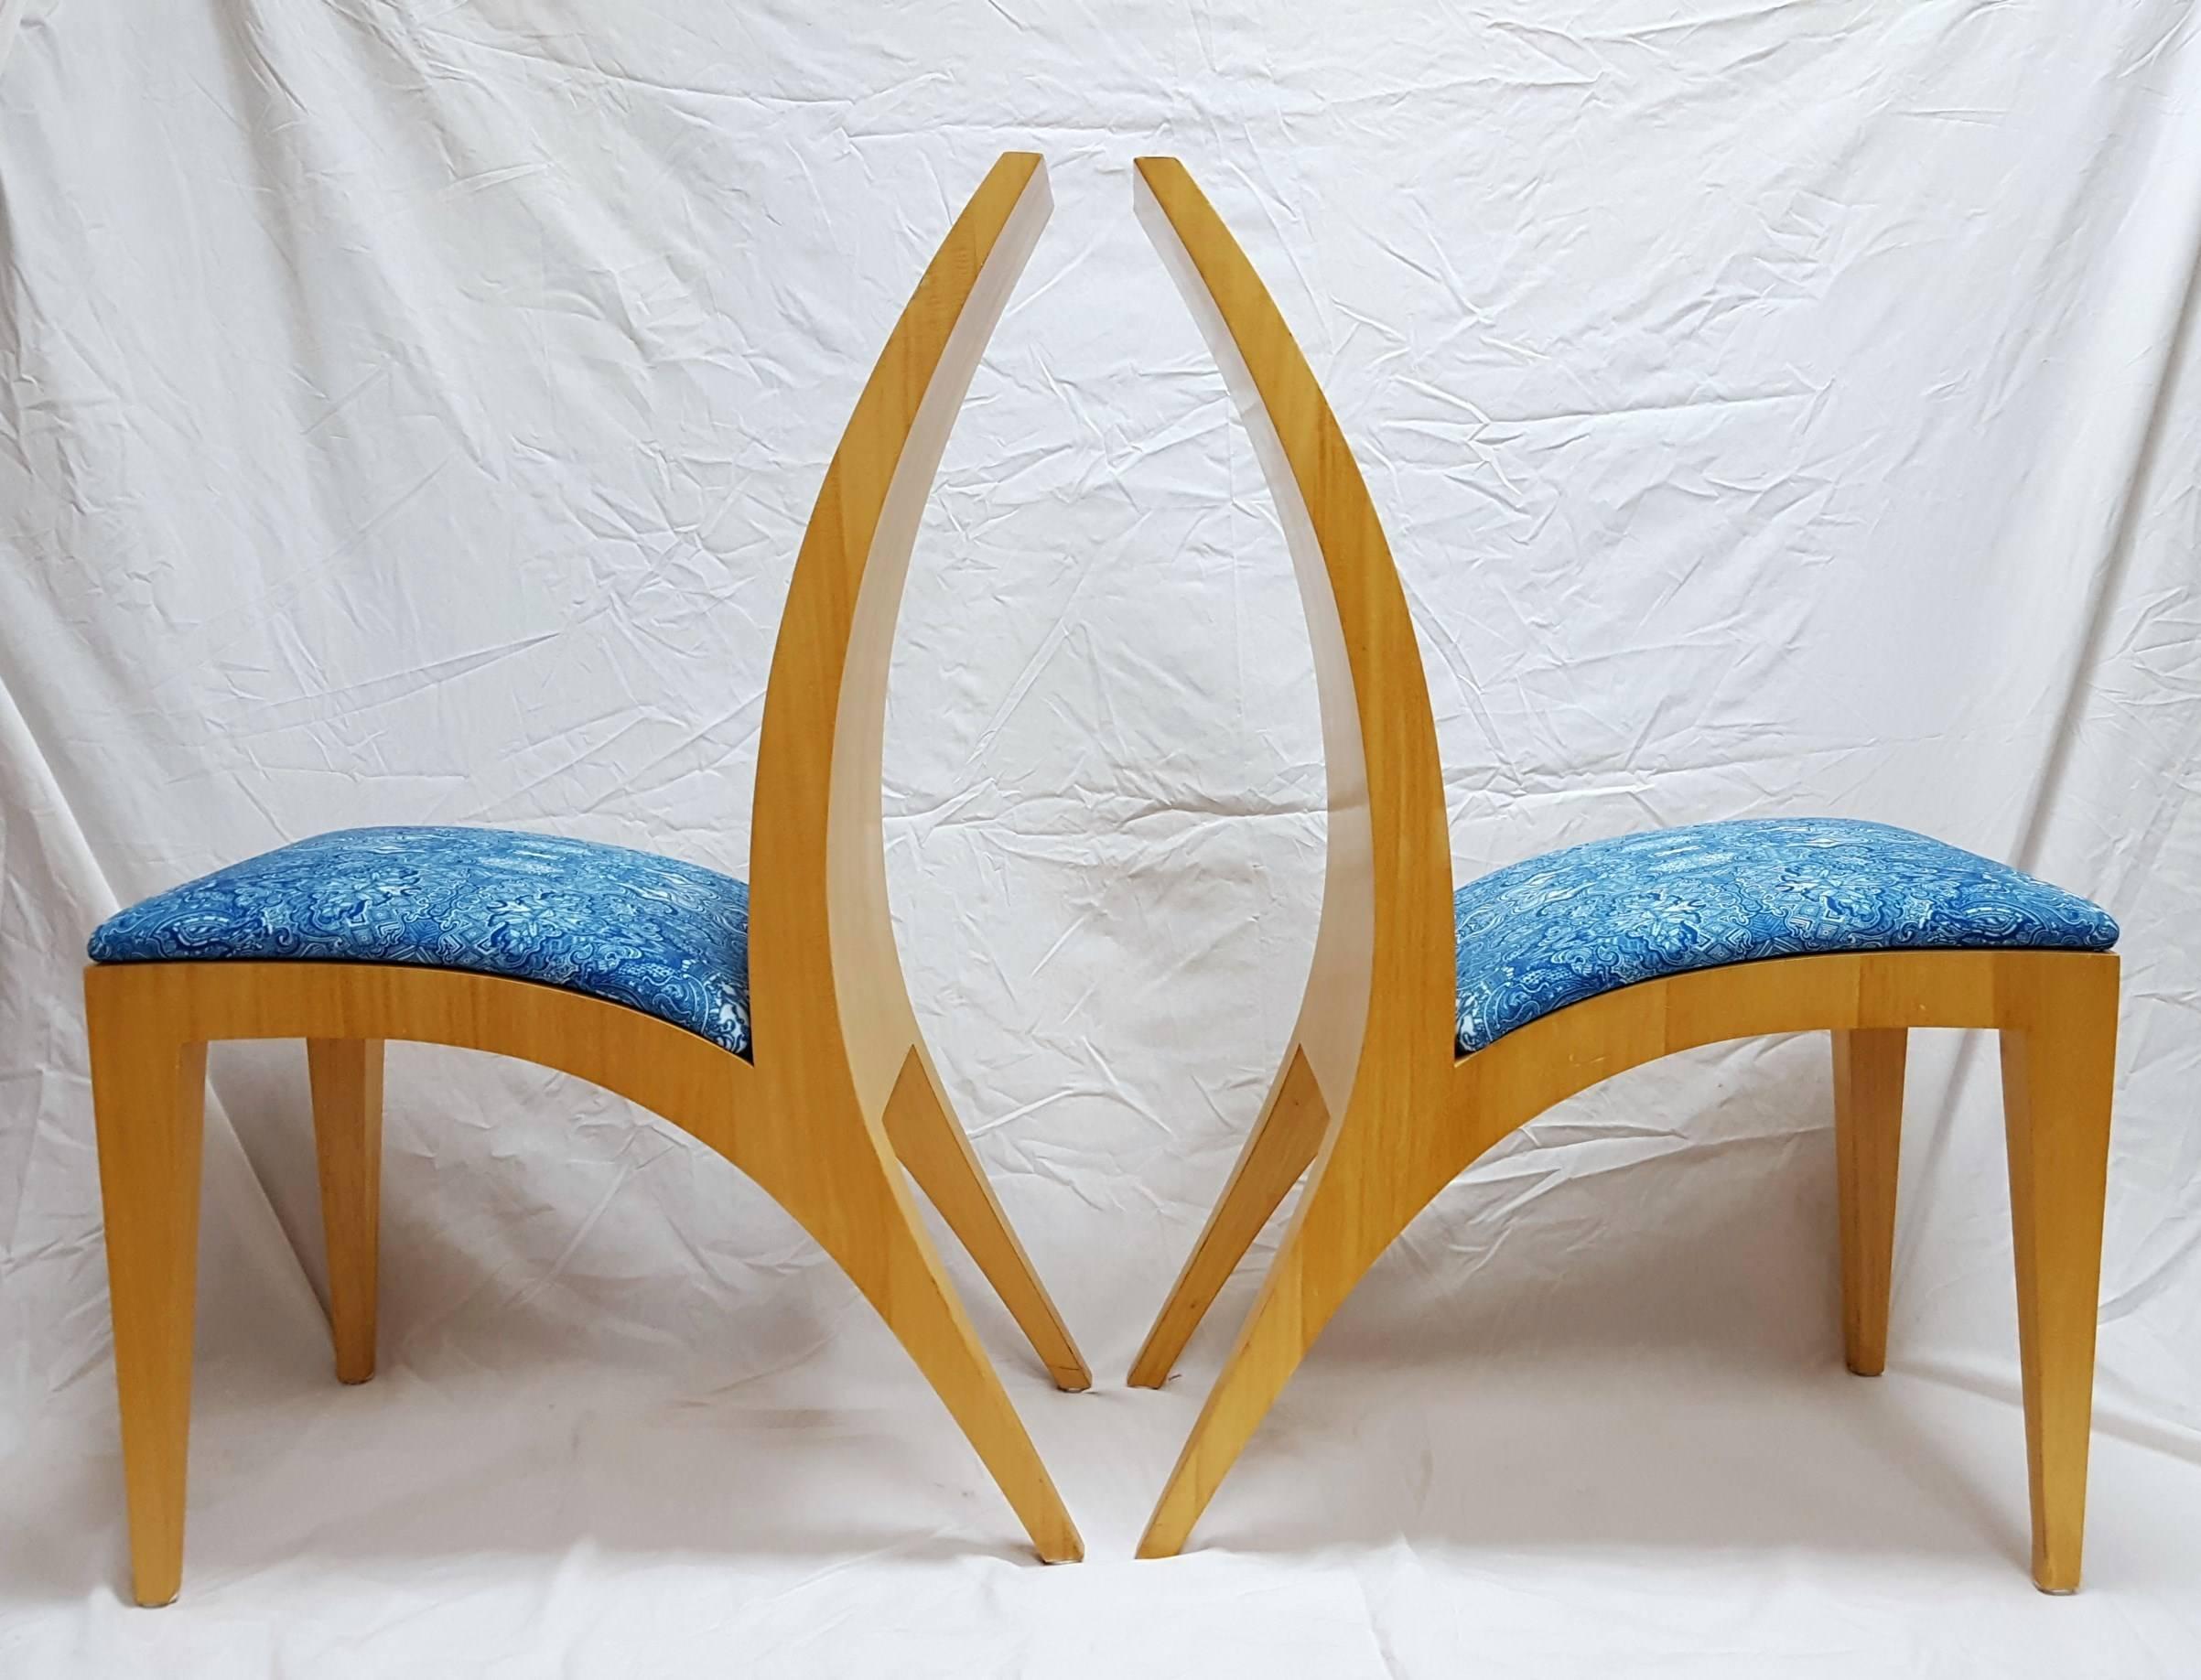 A pair of Anigre wood Italian mid-century modern chairs with removable fabric covered cushioned seats designed by American artist Jack Graves III (1988-), 2015. Chairs have sweeping back legs and flared backs. The chairs are circa 1950's, Italy. The